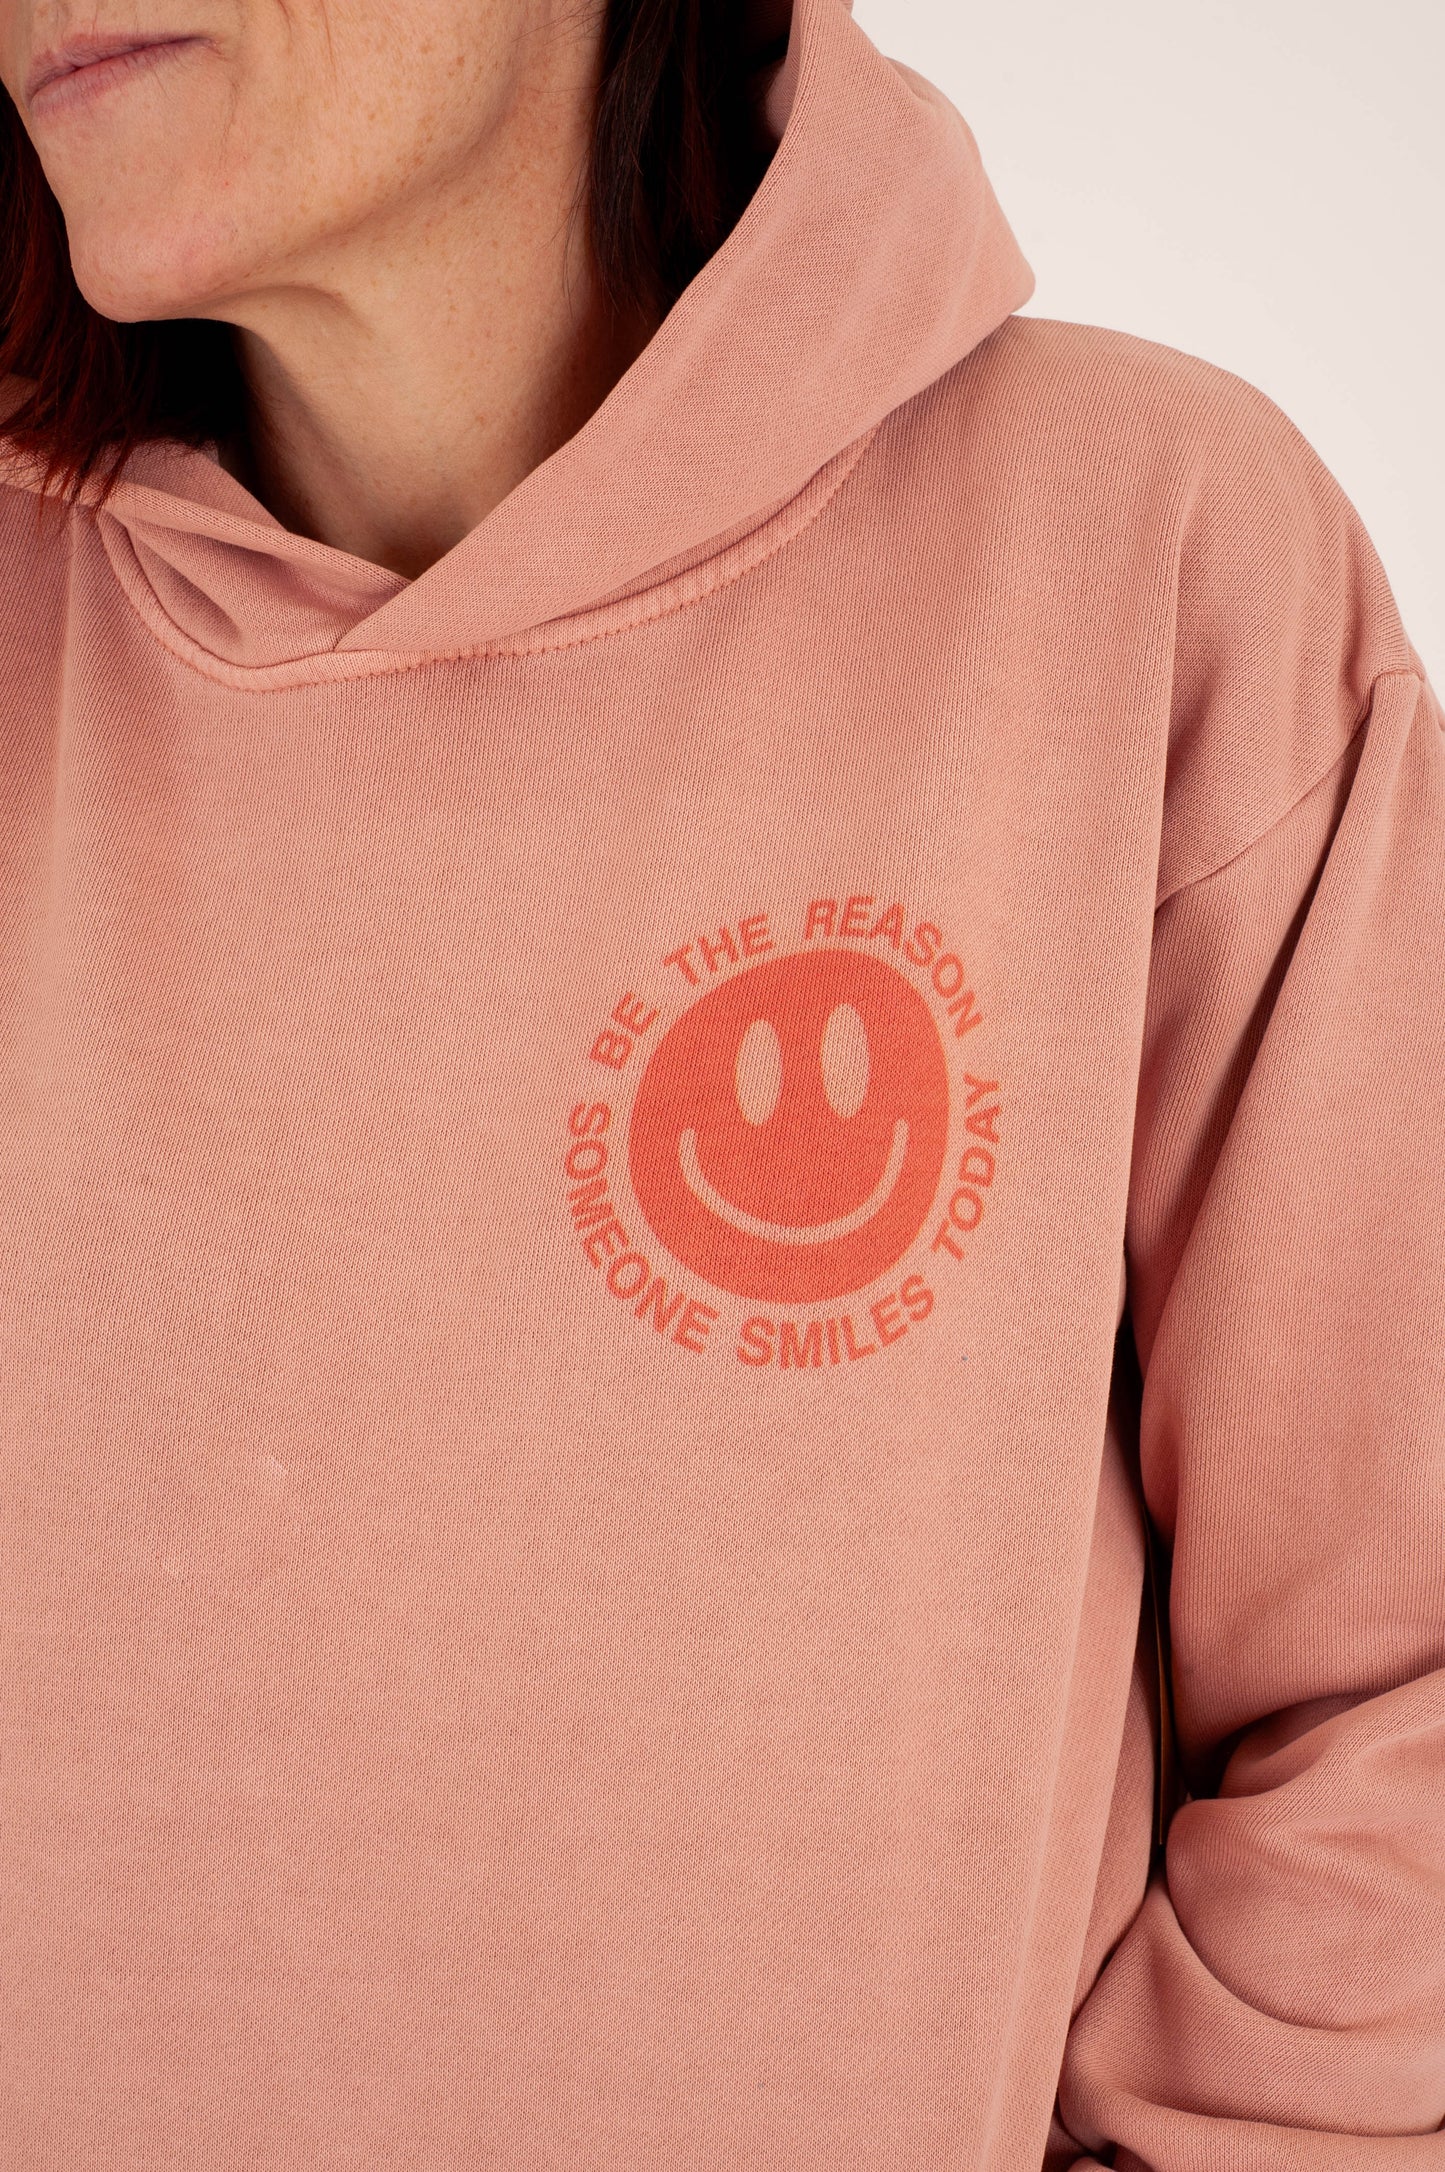 Be The Reason Graphic Hoodie